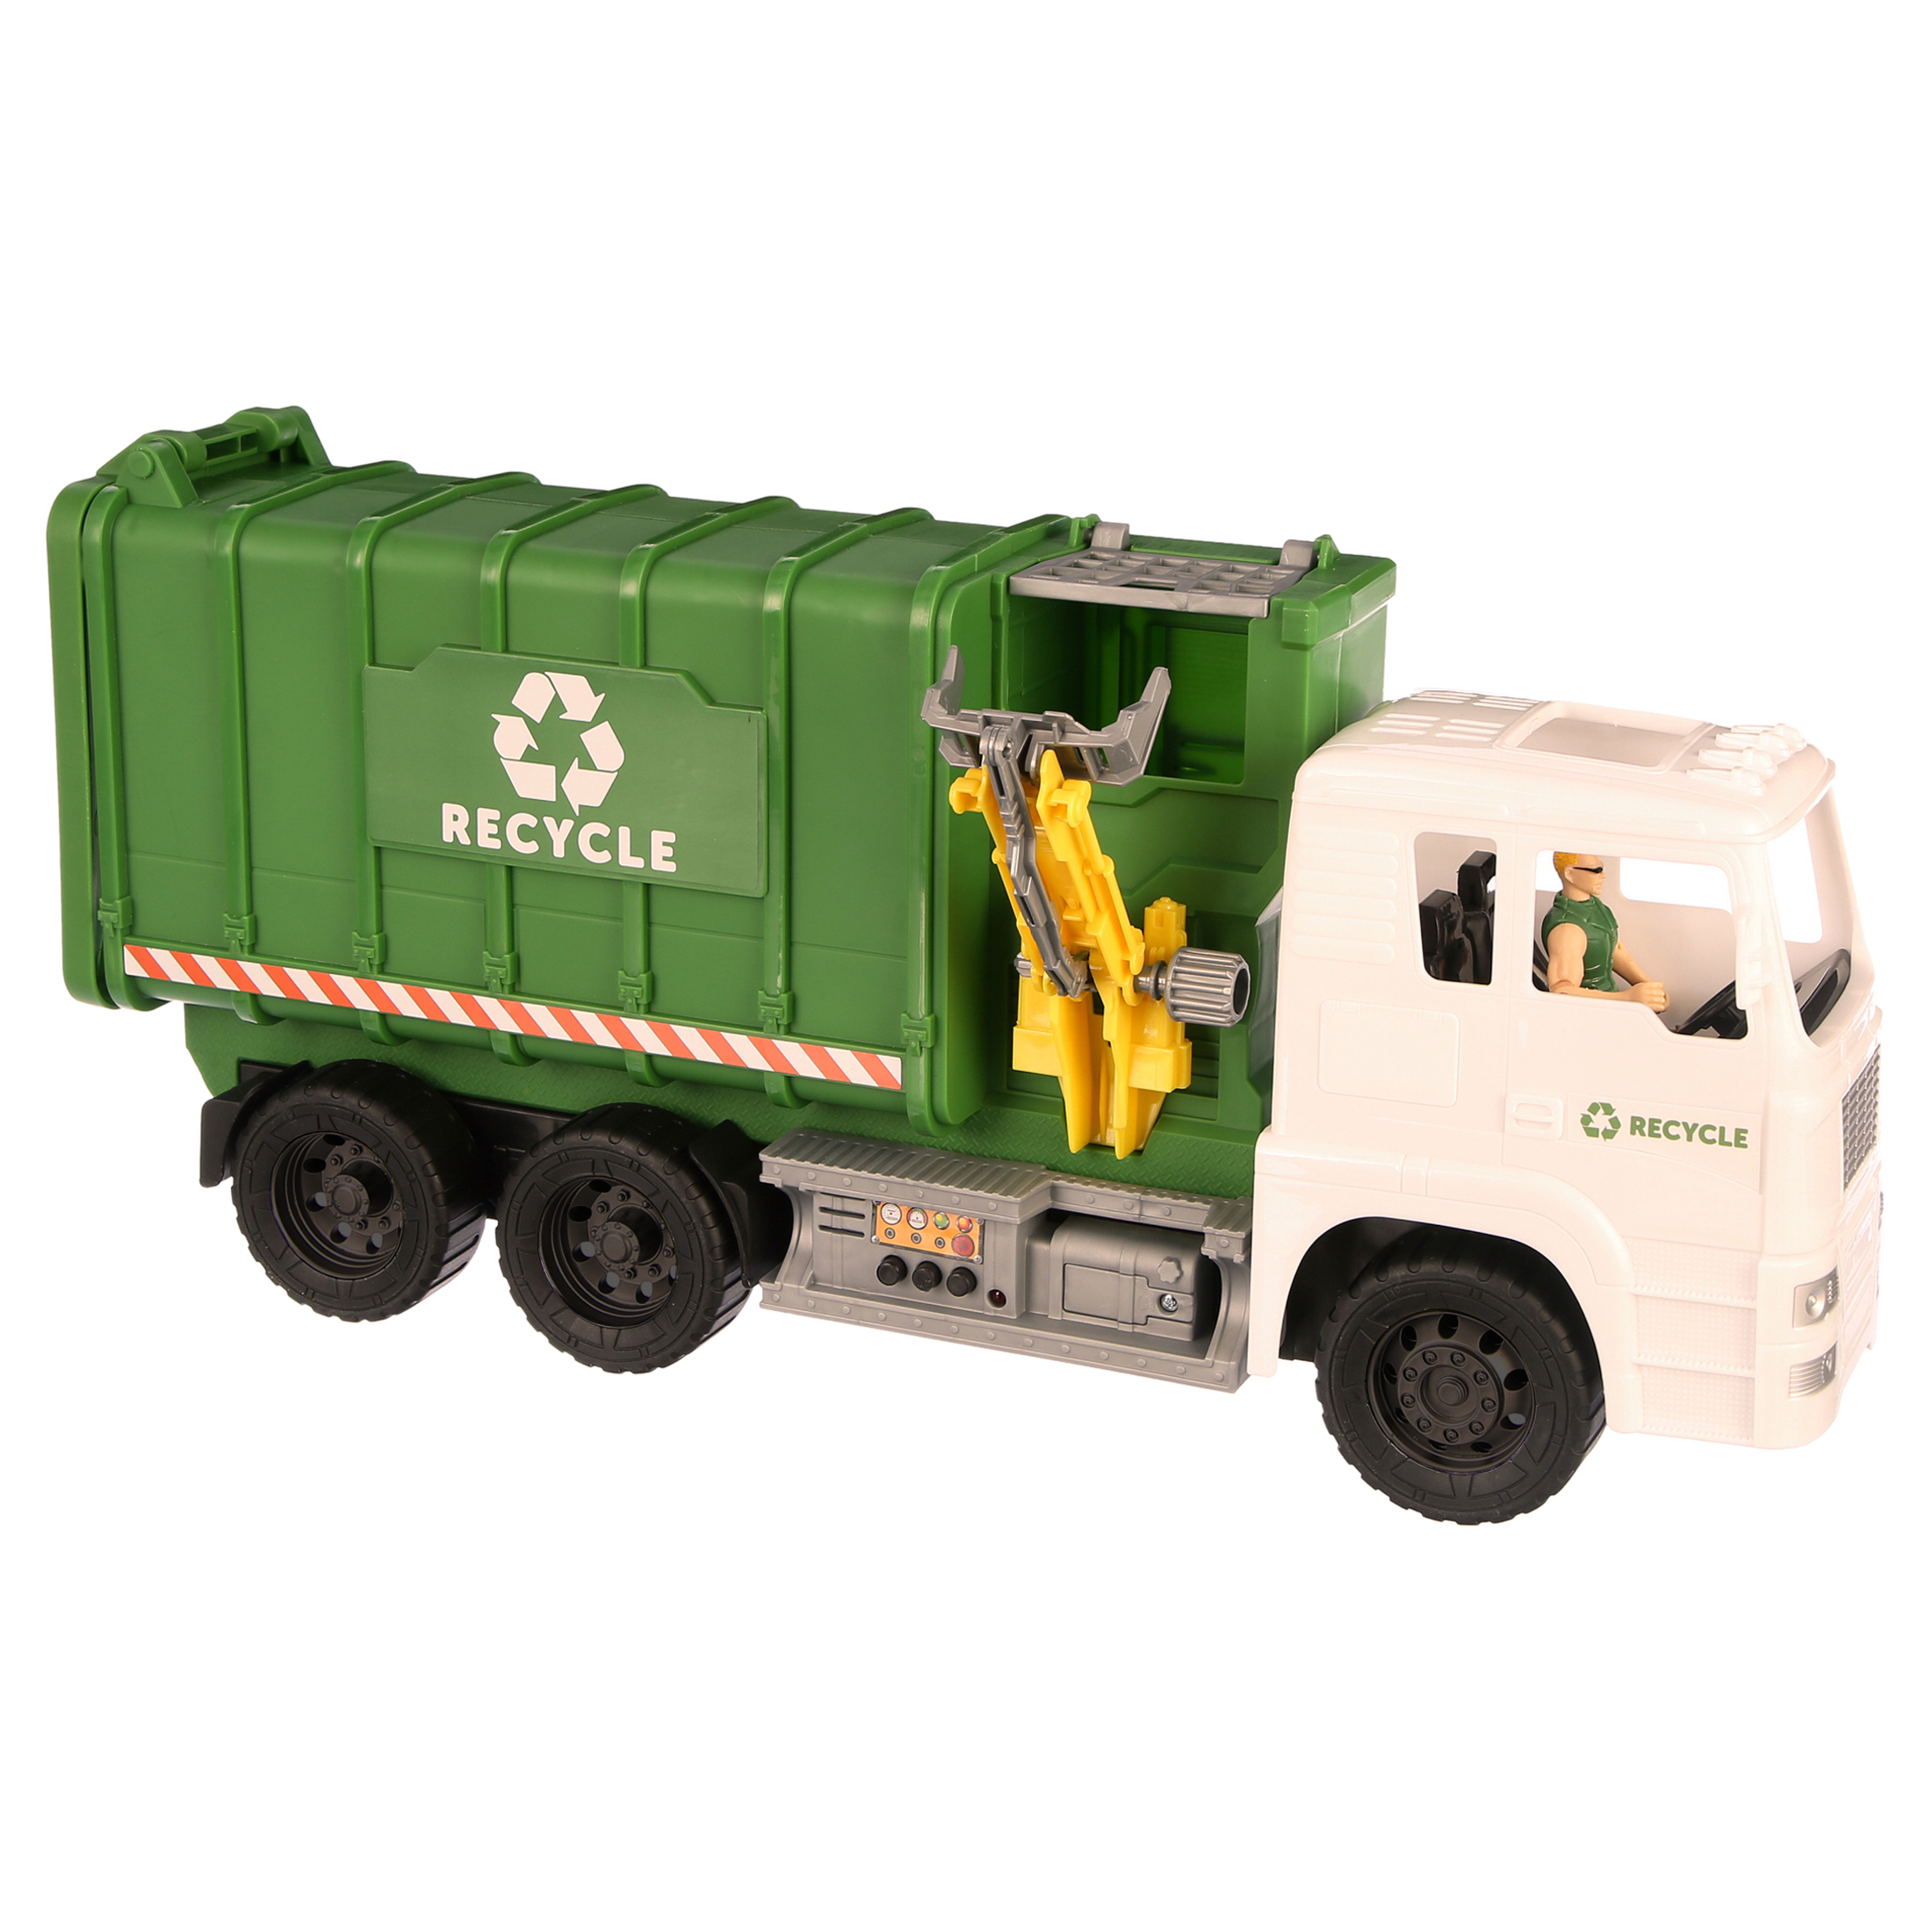 Kid Connection Recycling Truck Play Set, 11 Pieces - image 5 of 6